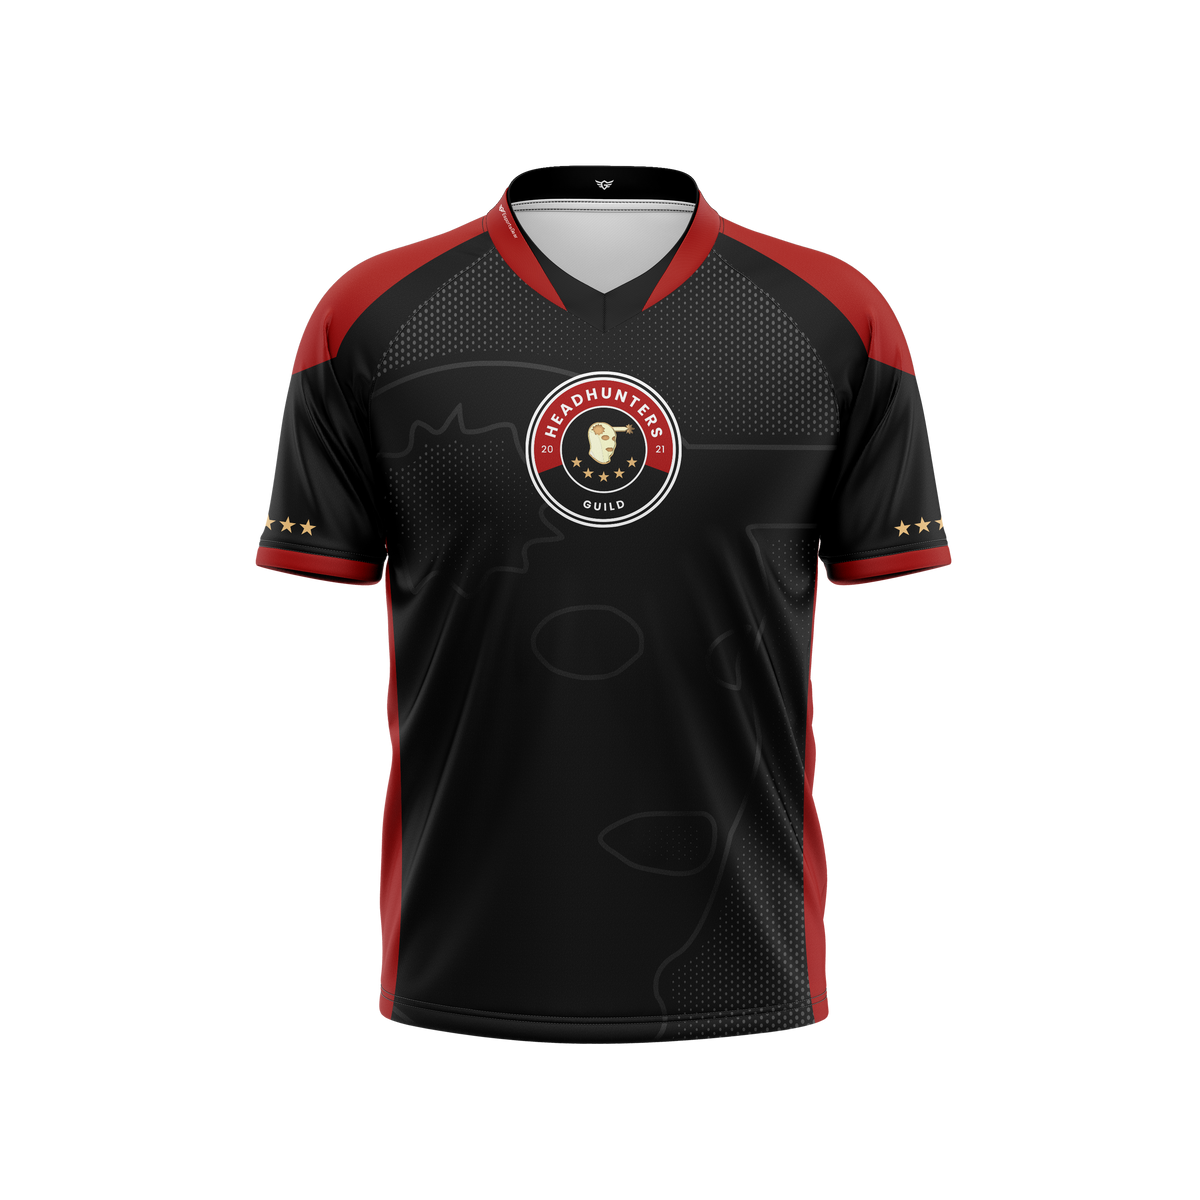 Headhunters Guild Jersey